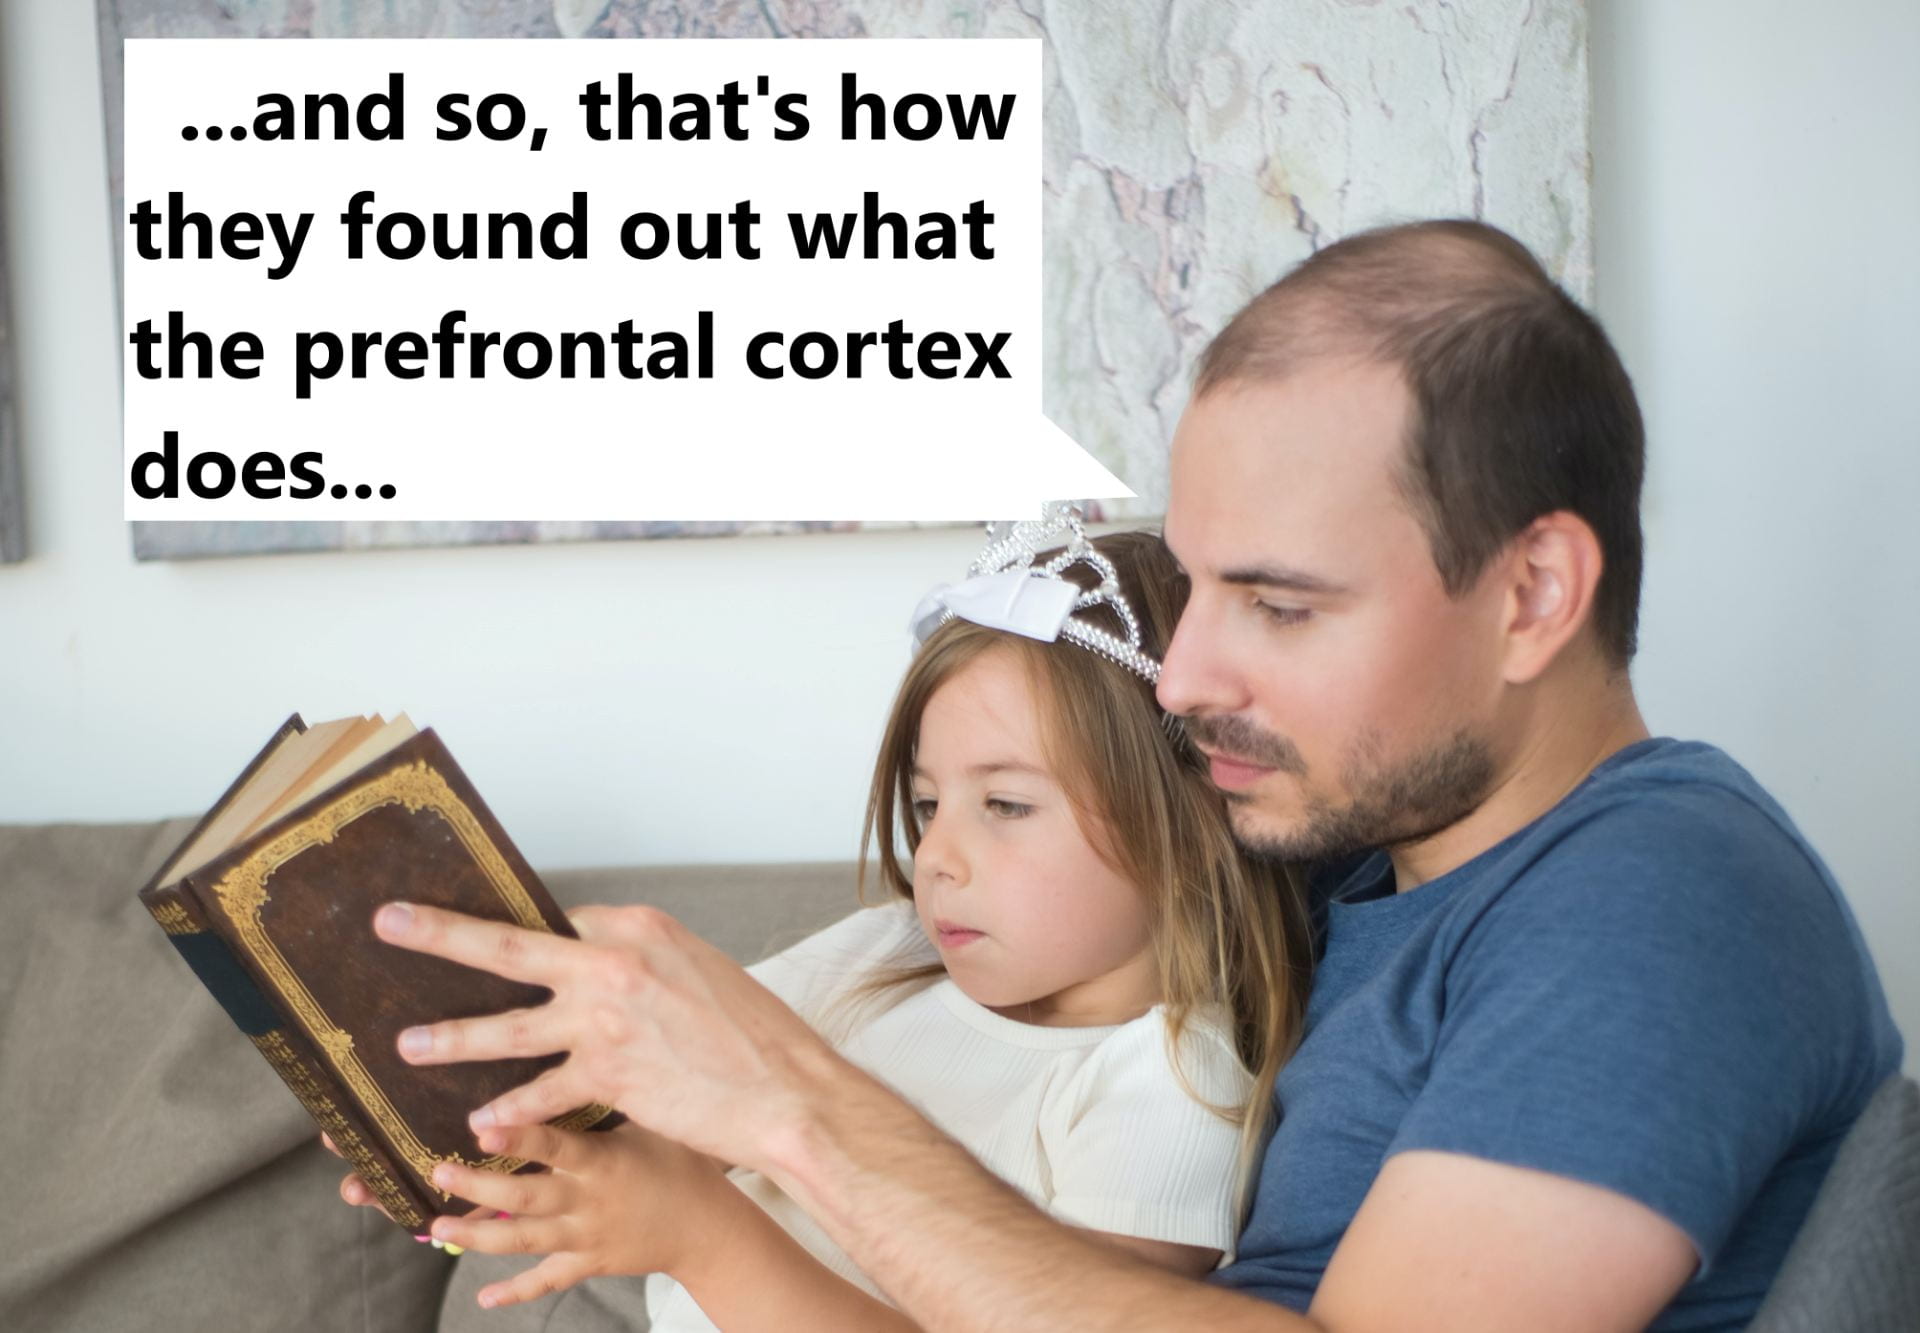 [A father, reading a book with his daughter on the couch, is saying ‘...and so, that’s how they found out what the prefrontal cortex does…’]